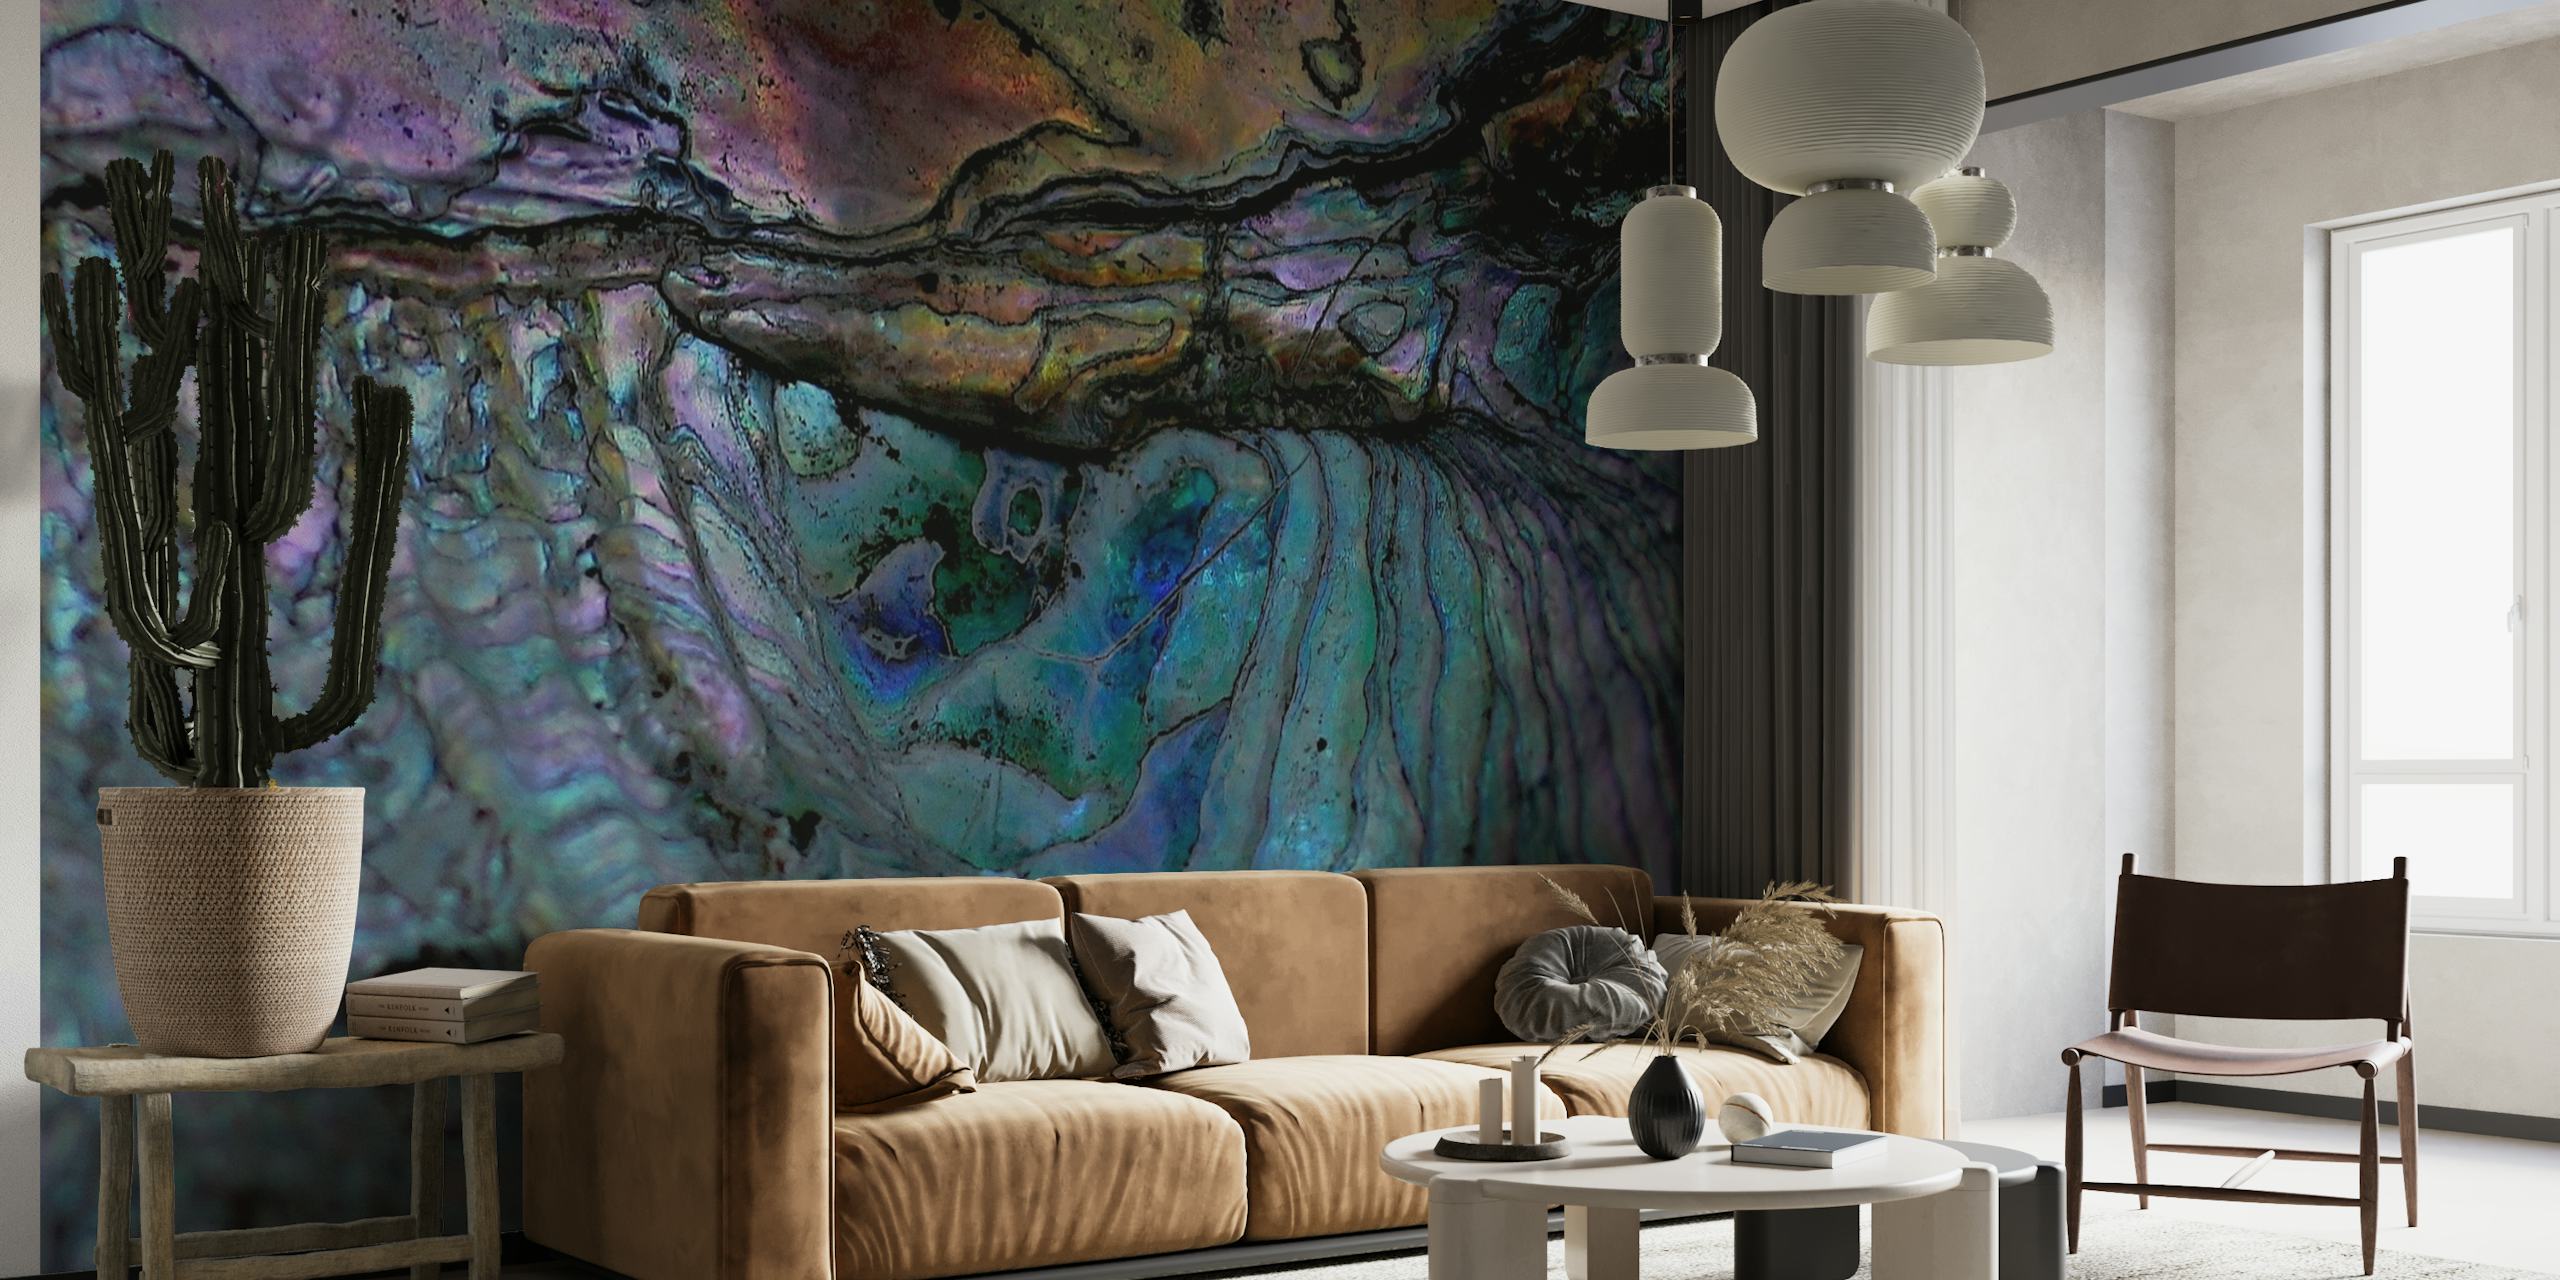 Abstract wall mural depicting the scene of an alligator catching an eel with vibrant colors.